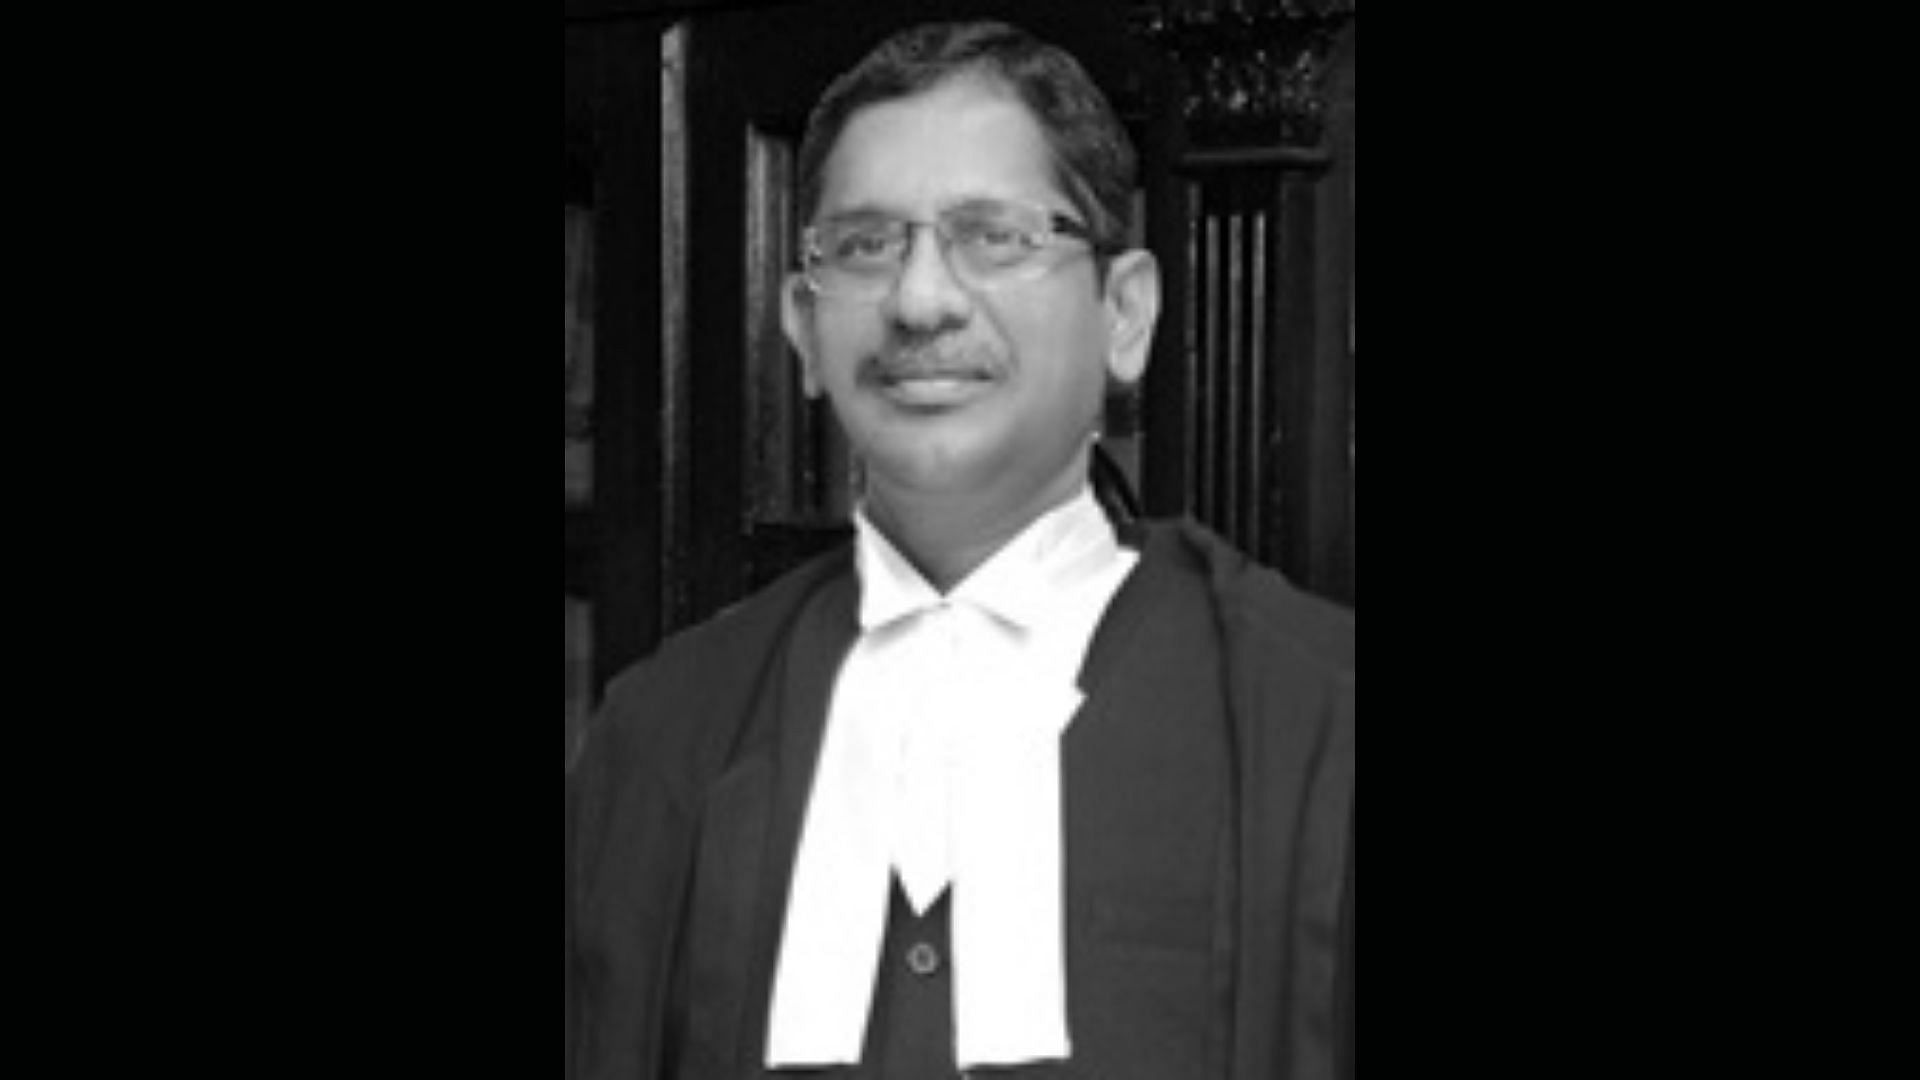 A recommendation letter by CJI Bobde, who is set to retire on 23 April, has been sent to the Union Law Ministry.